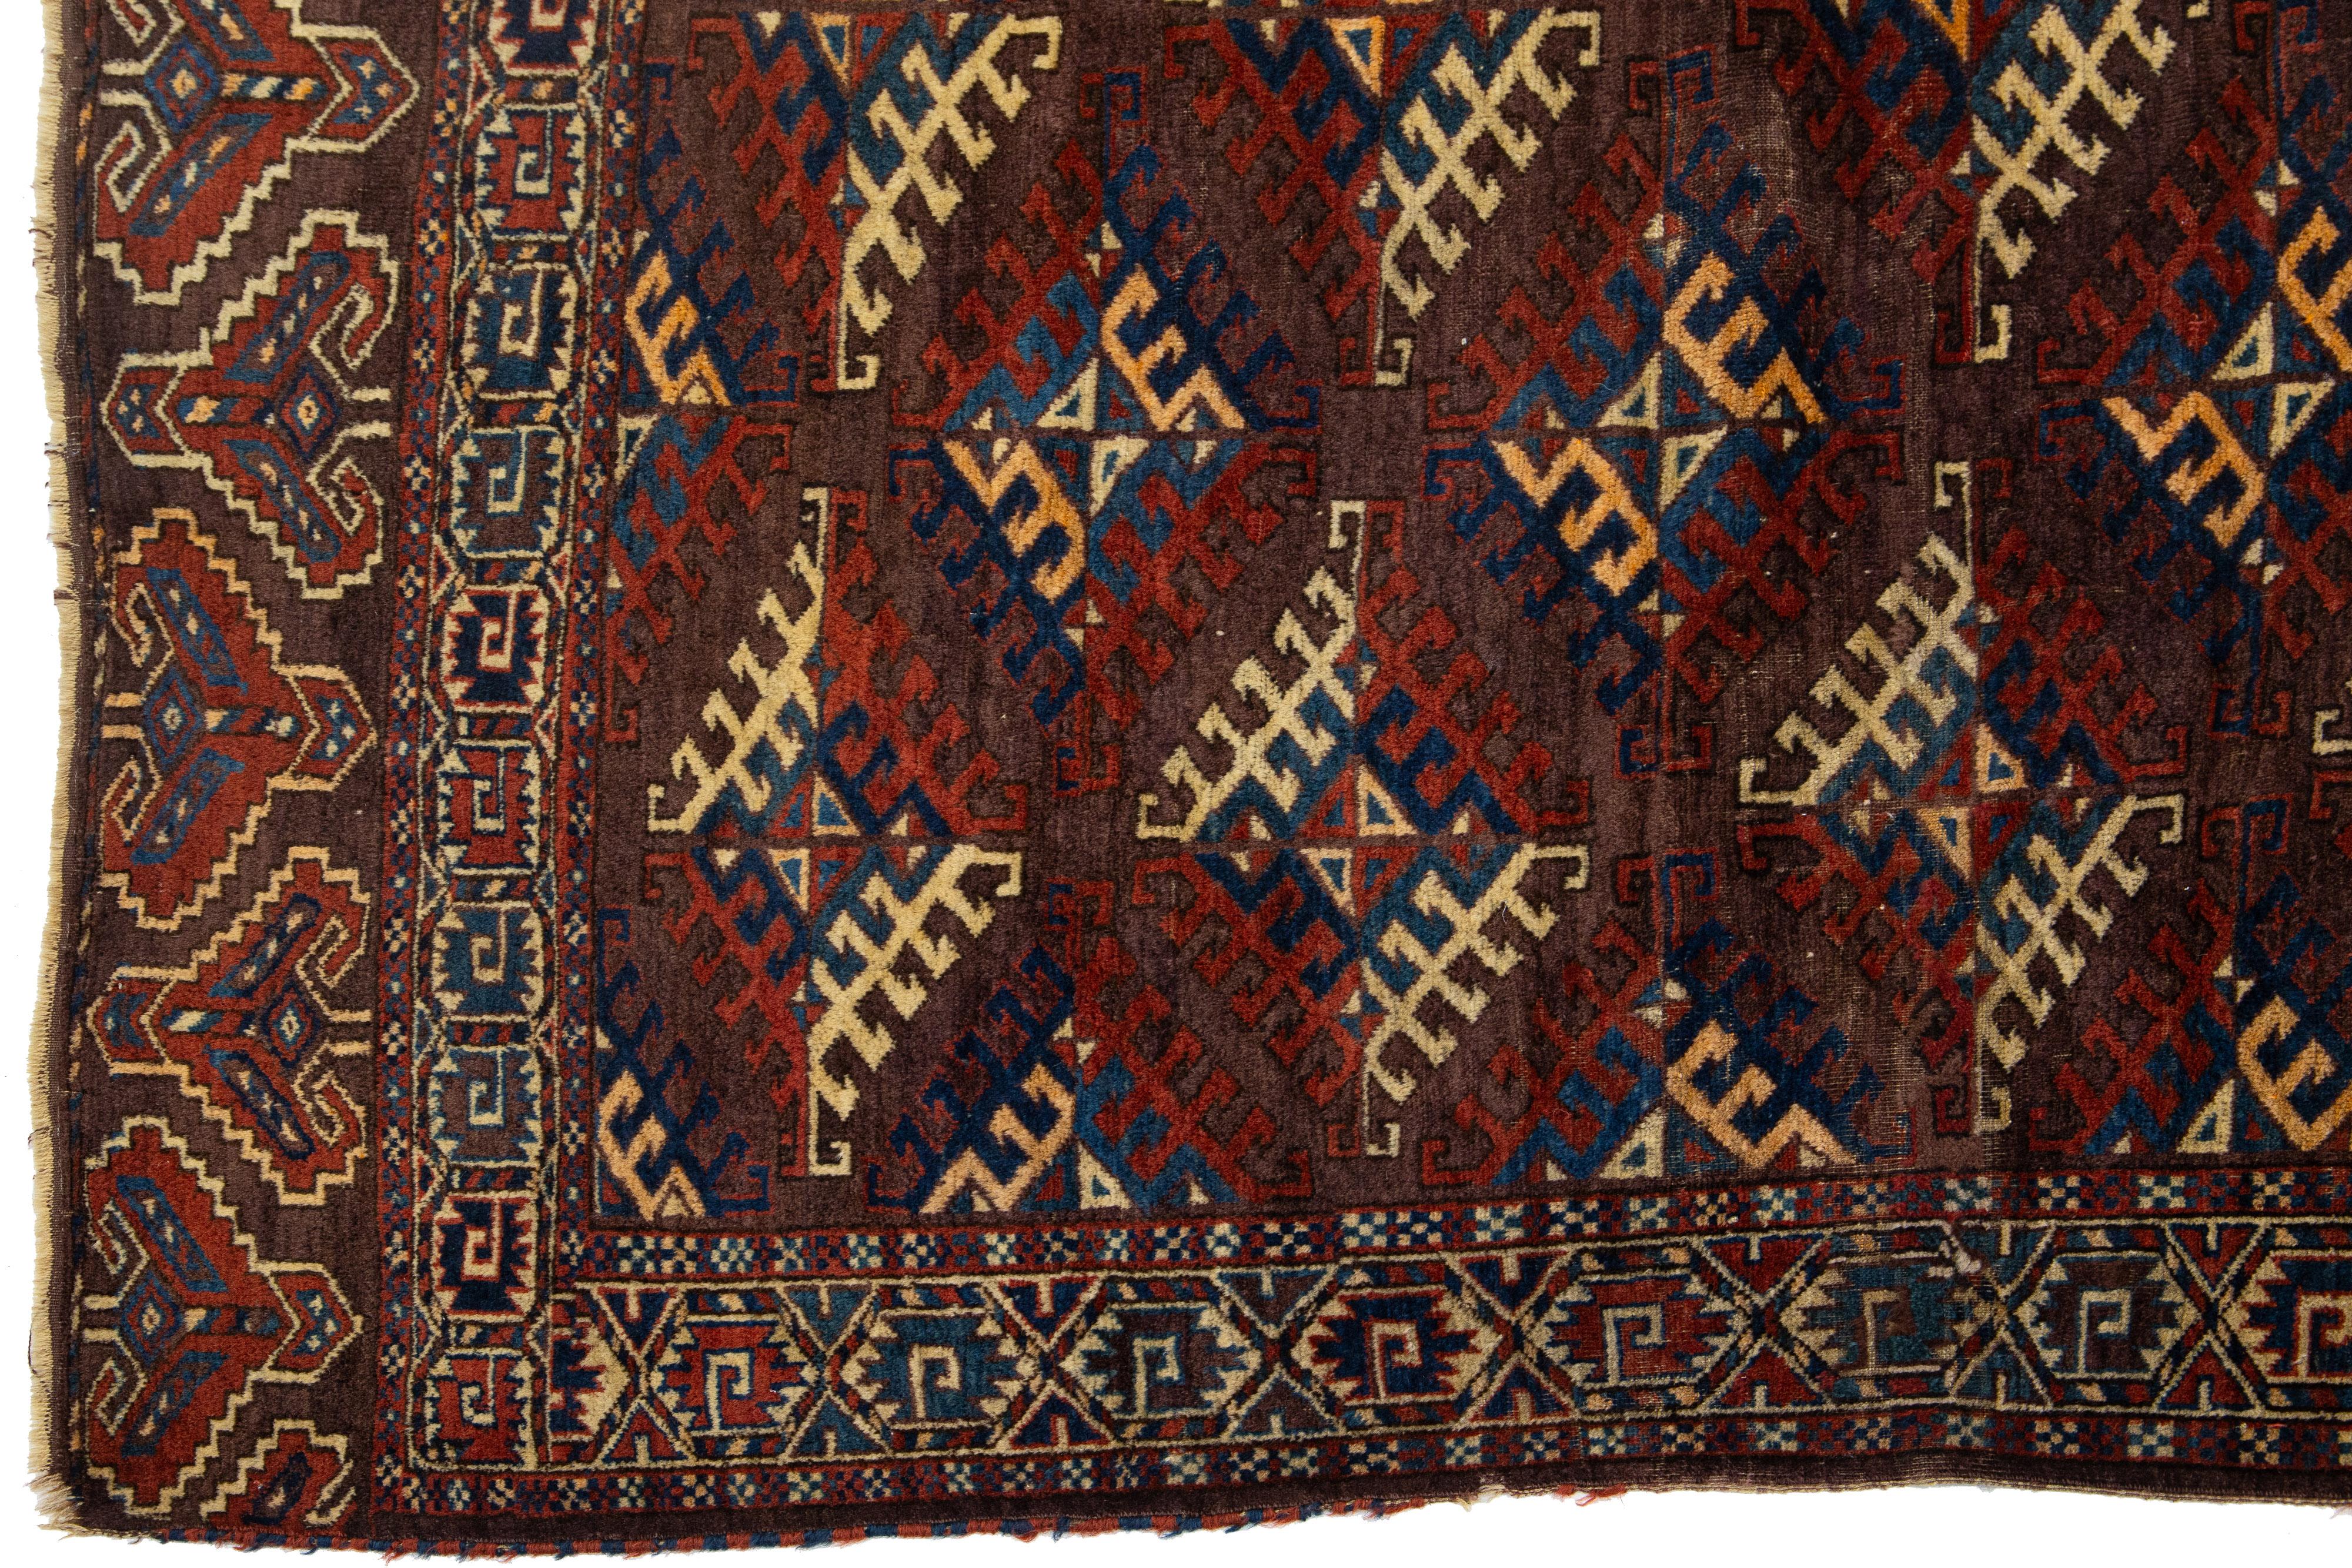 Late 19th Century 1890s Antique Geometric Wool Rug Afghan Turkmen In Brown For Sale